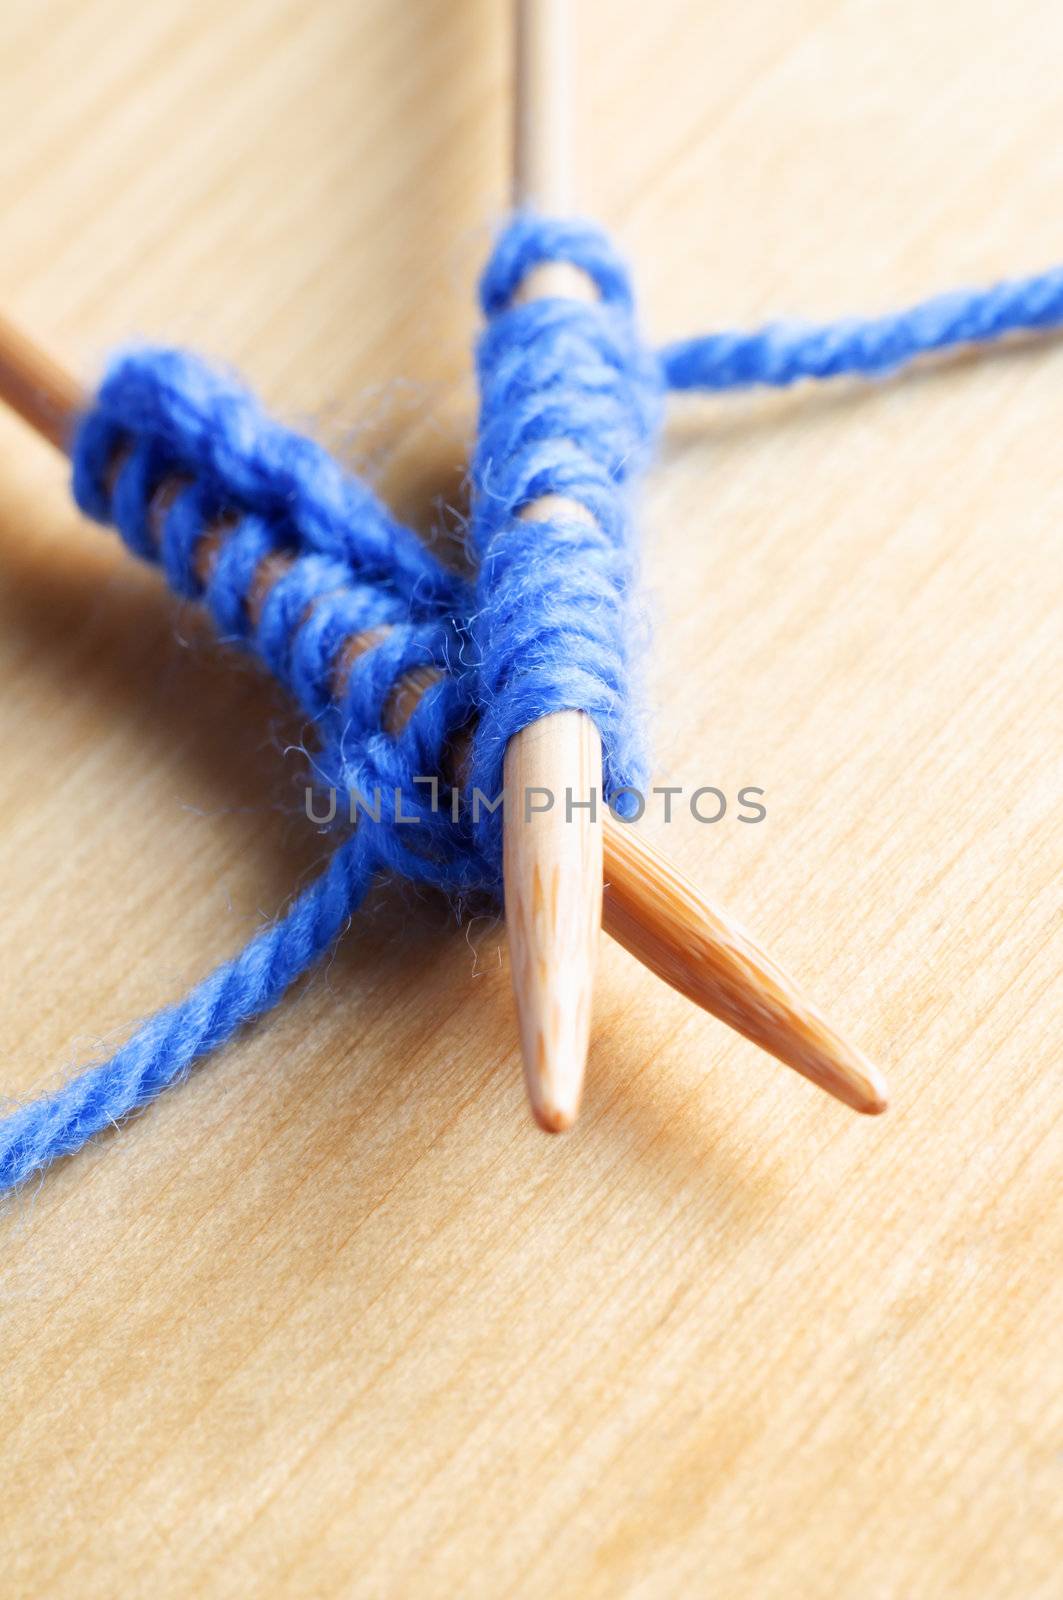 Knitted Stitches on Wooden Needles by frannyanne